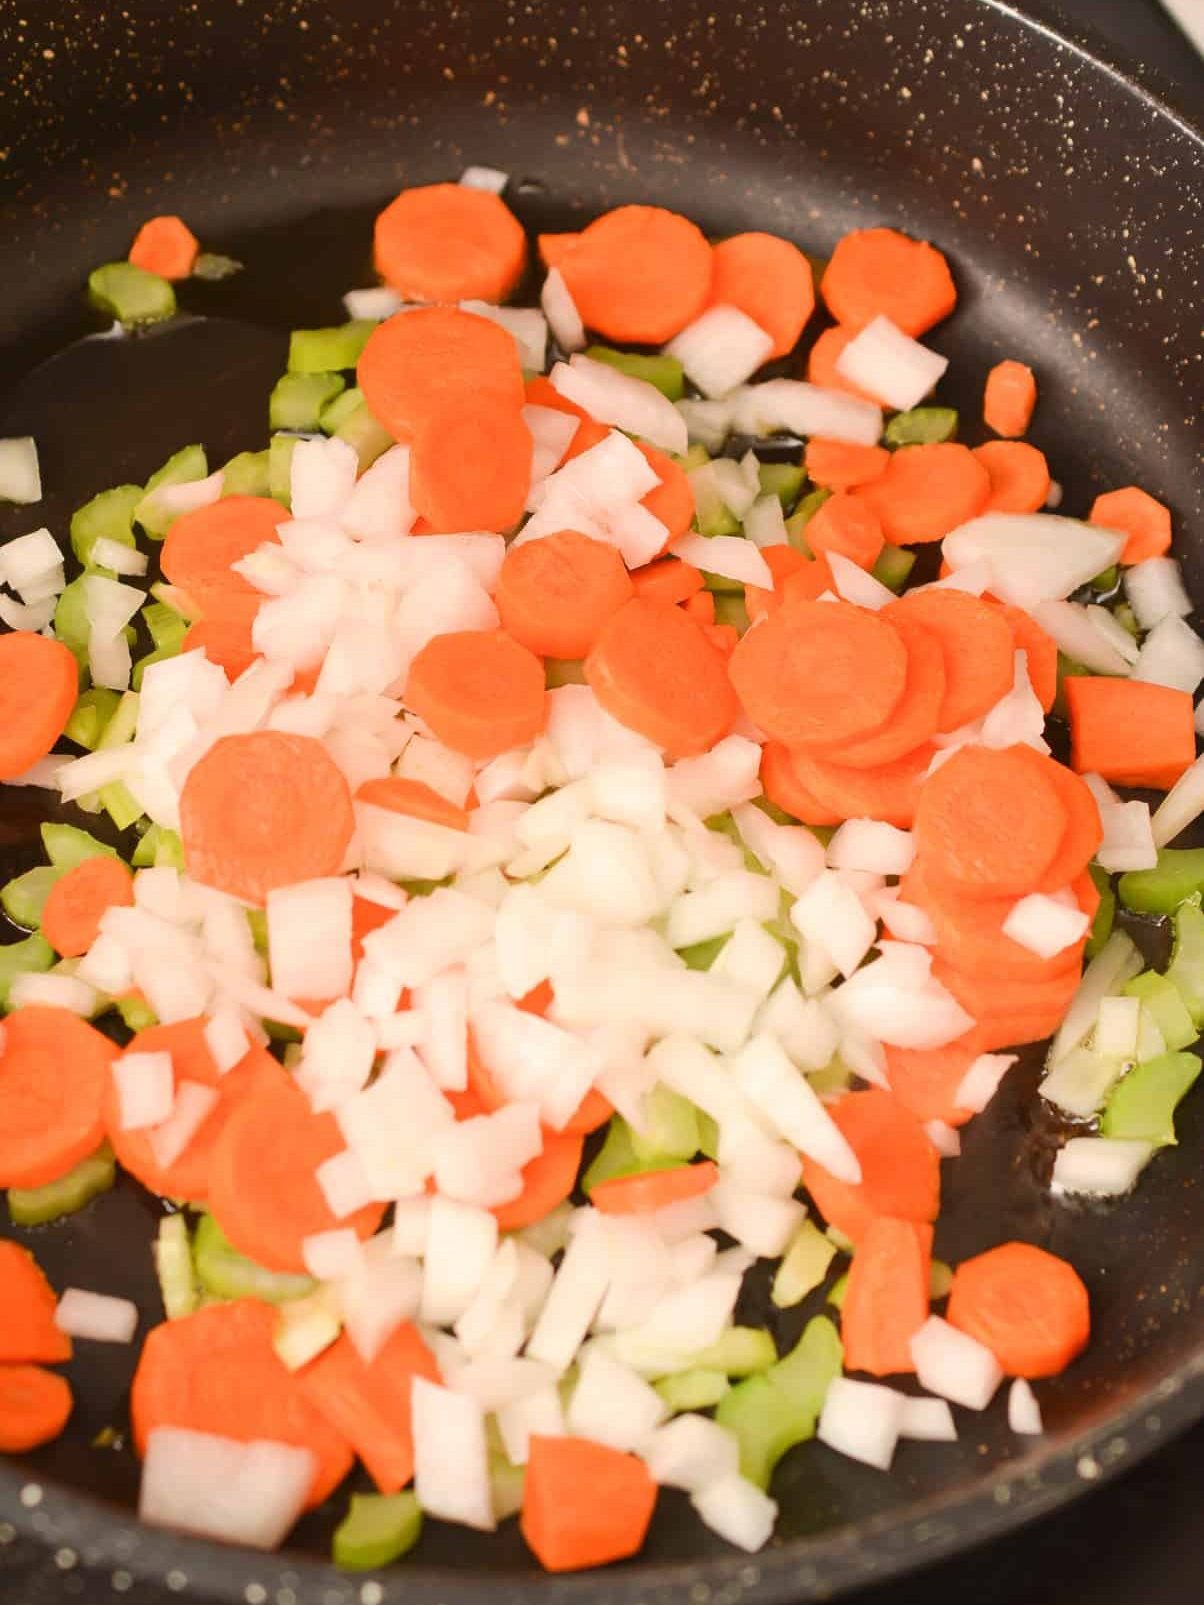 Add the onions, celery, and carrots to the olive oil in a skillet over medium heat.